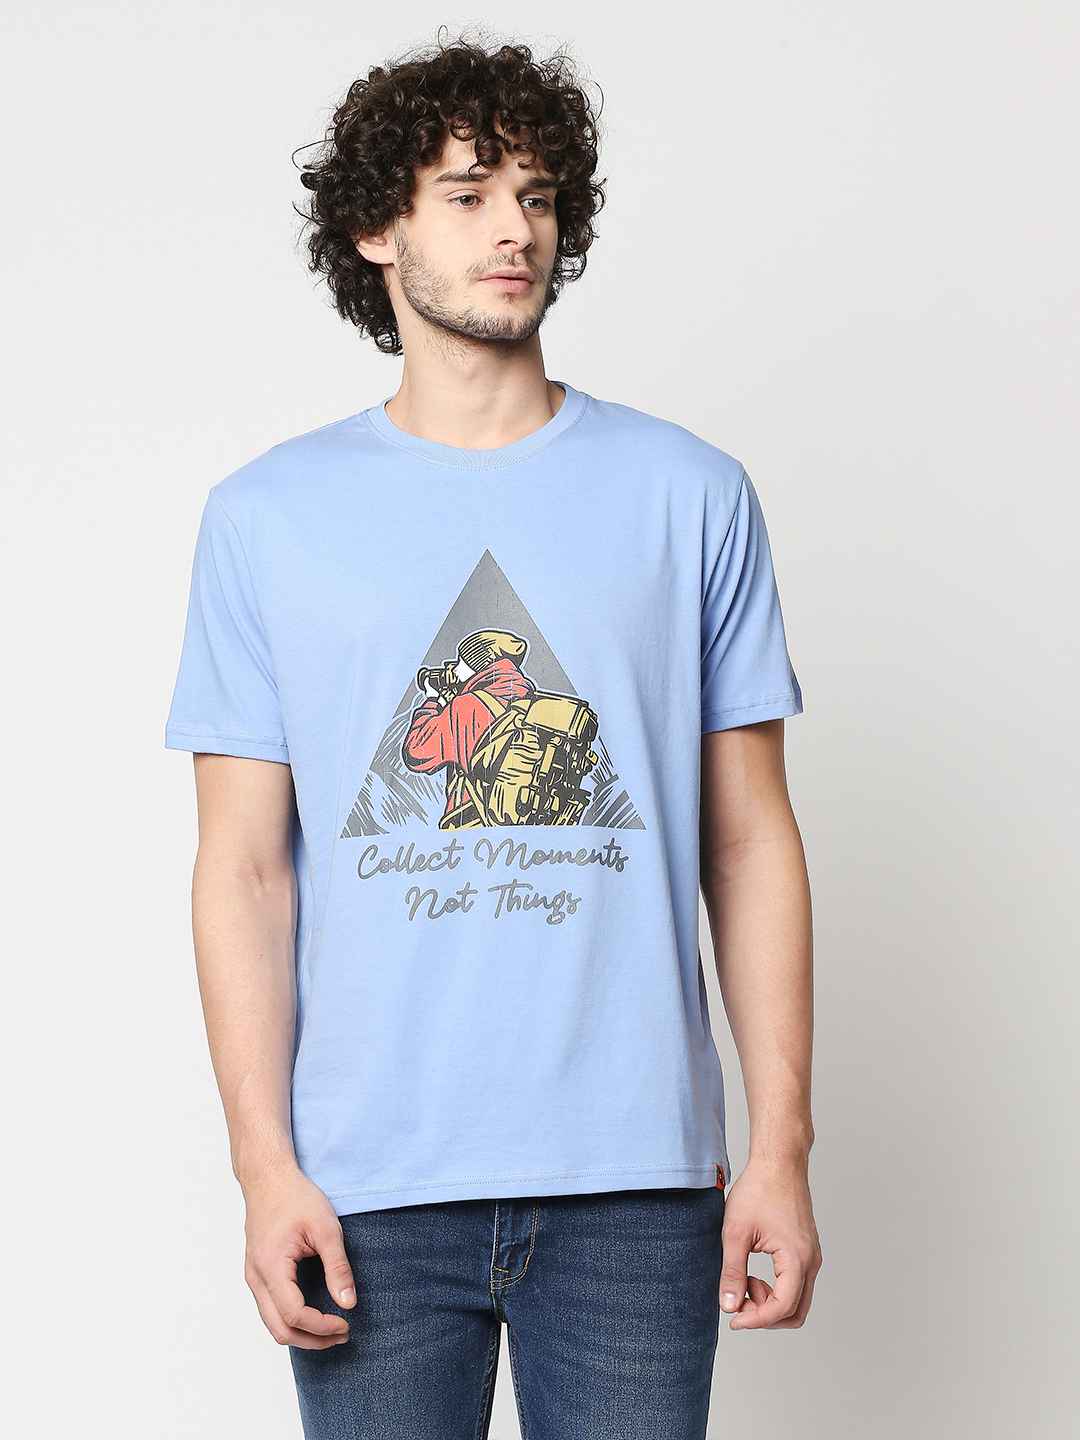 Buy Men's Powder blue Comfort fit T-shirt with chest print.